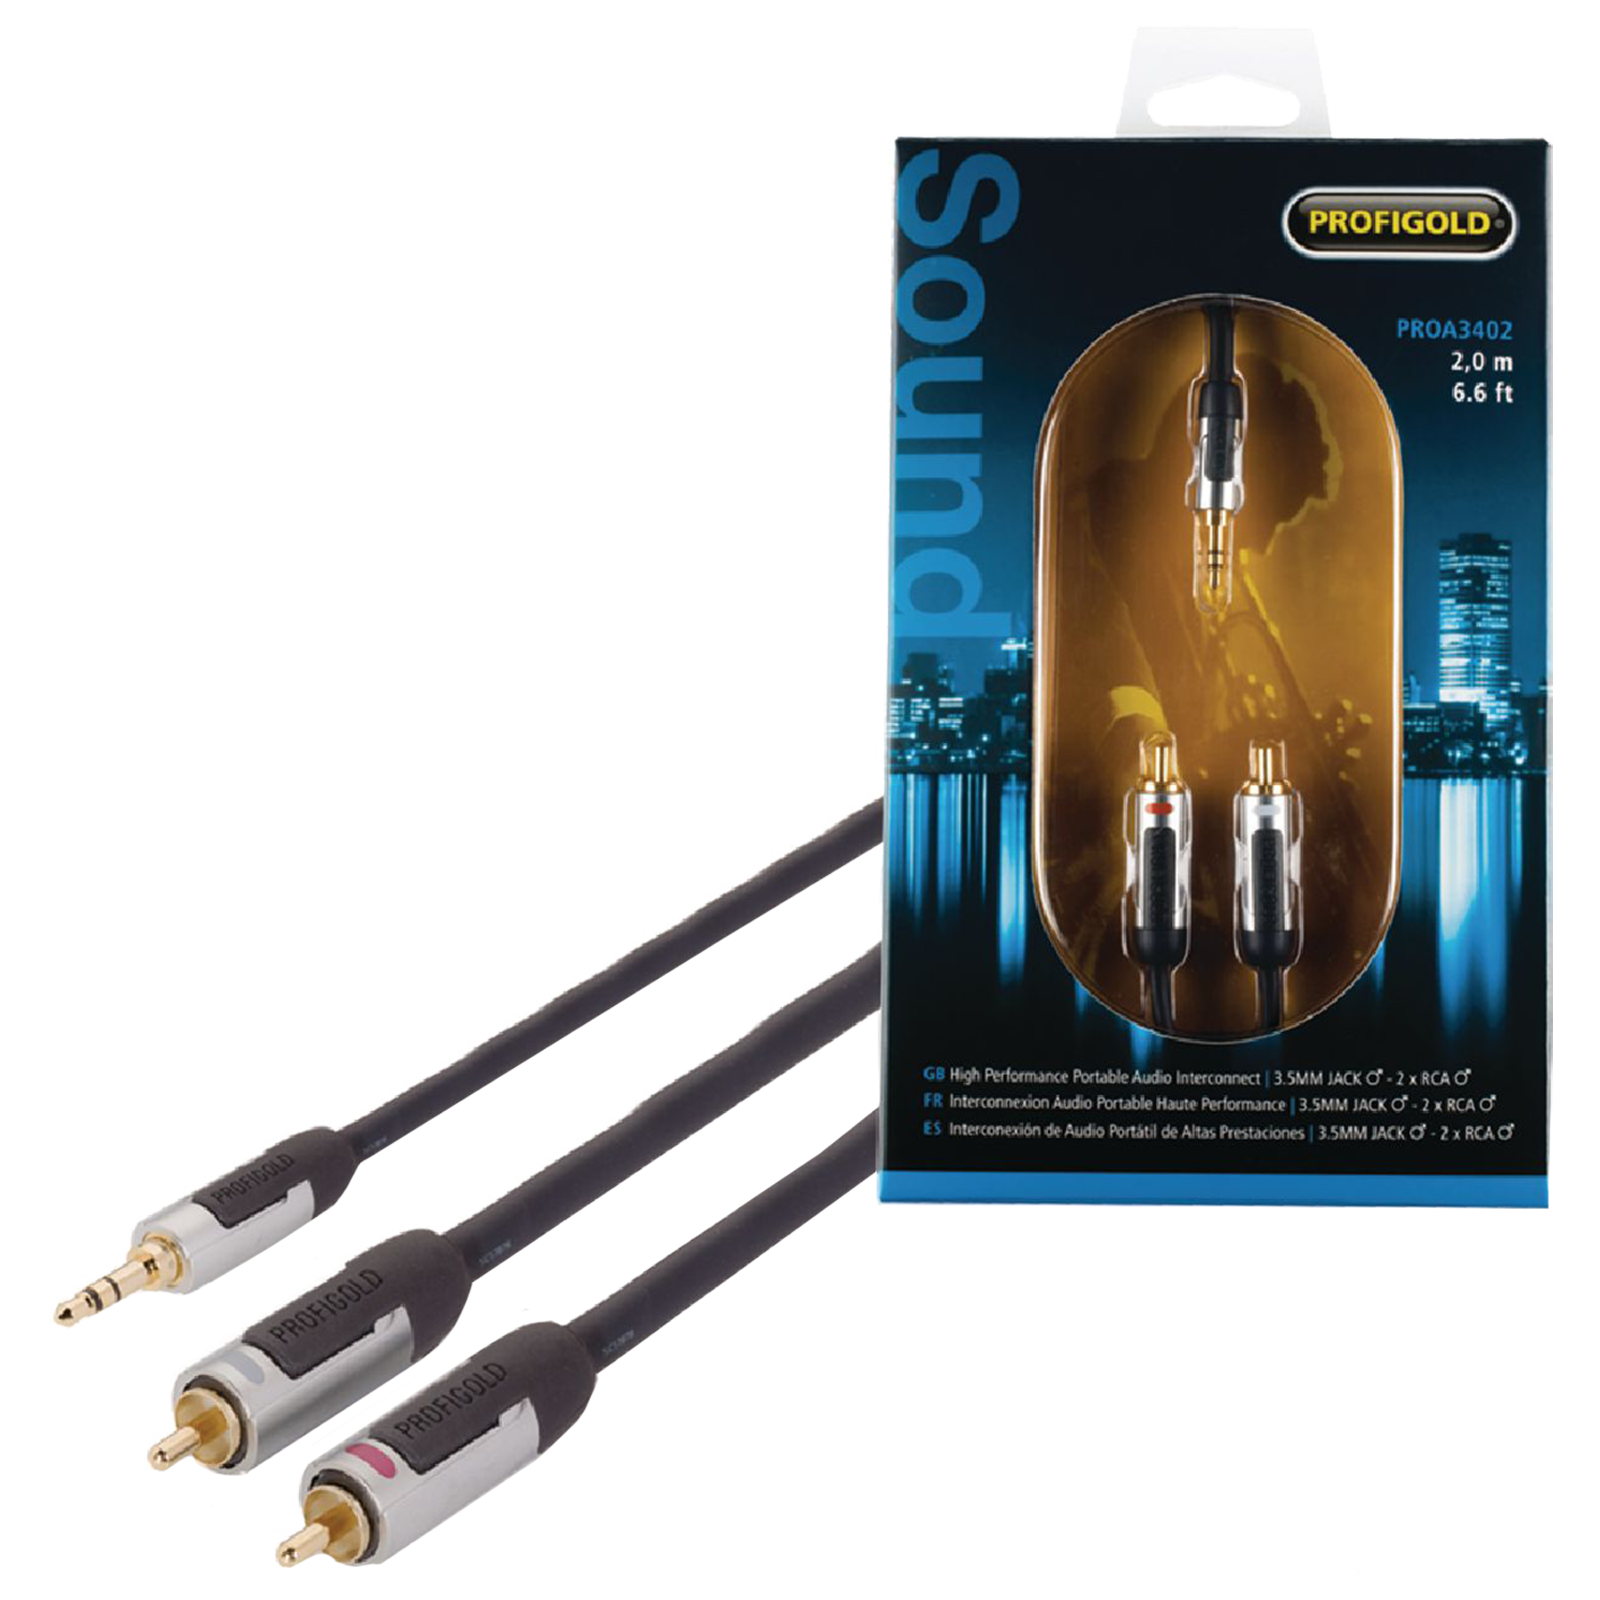 Profigold PROA3402 PVC 2 Meter 3.5mm Stereo to RCA Audio Cable (IAT Technology, Anthracite)